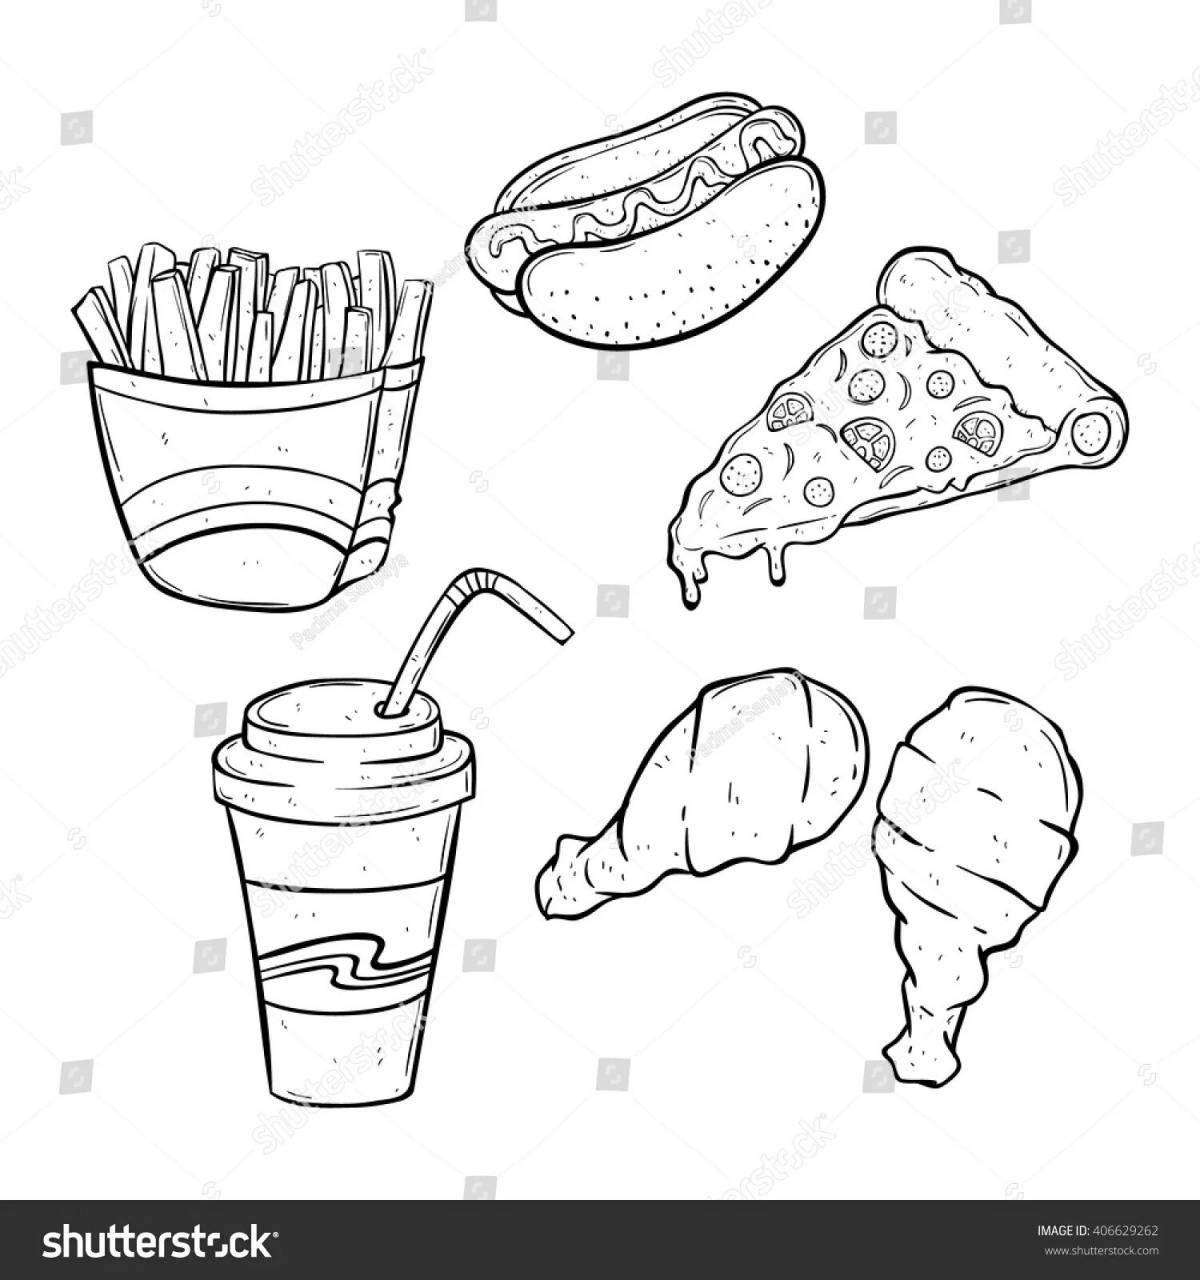 Coloring Page of Antioxidant Healthy Foods